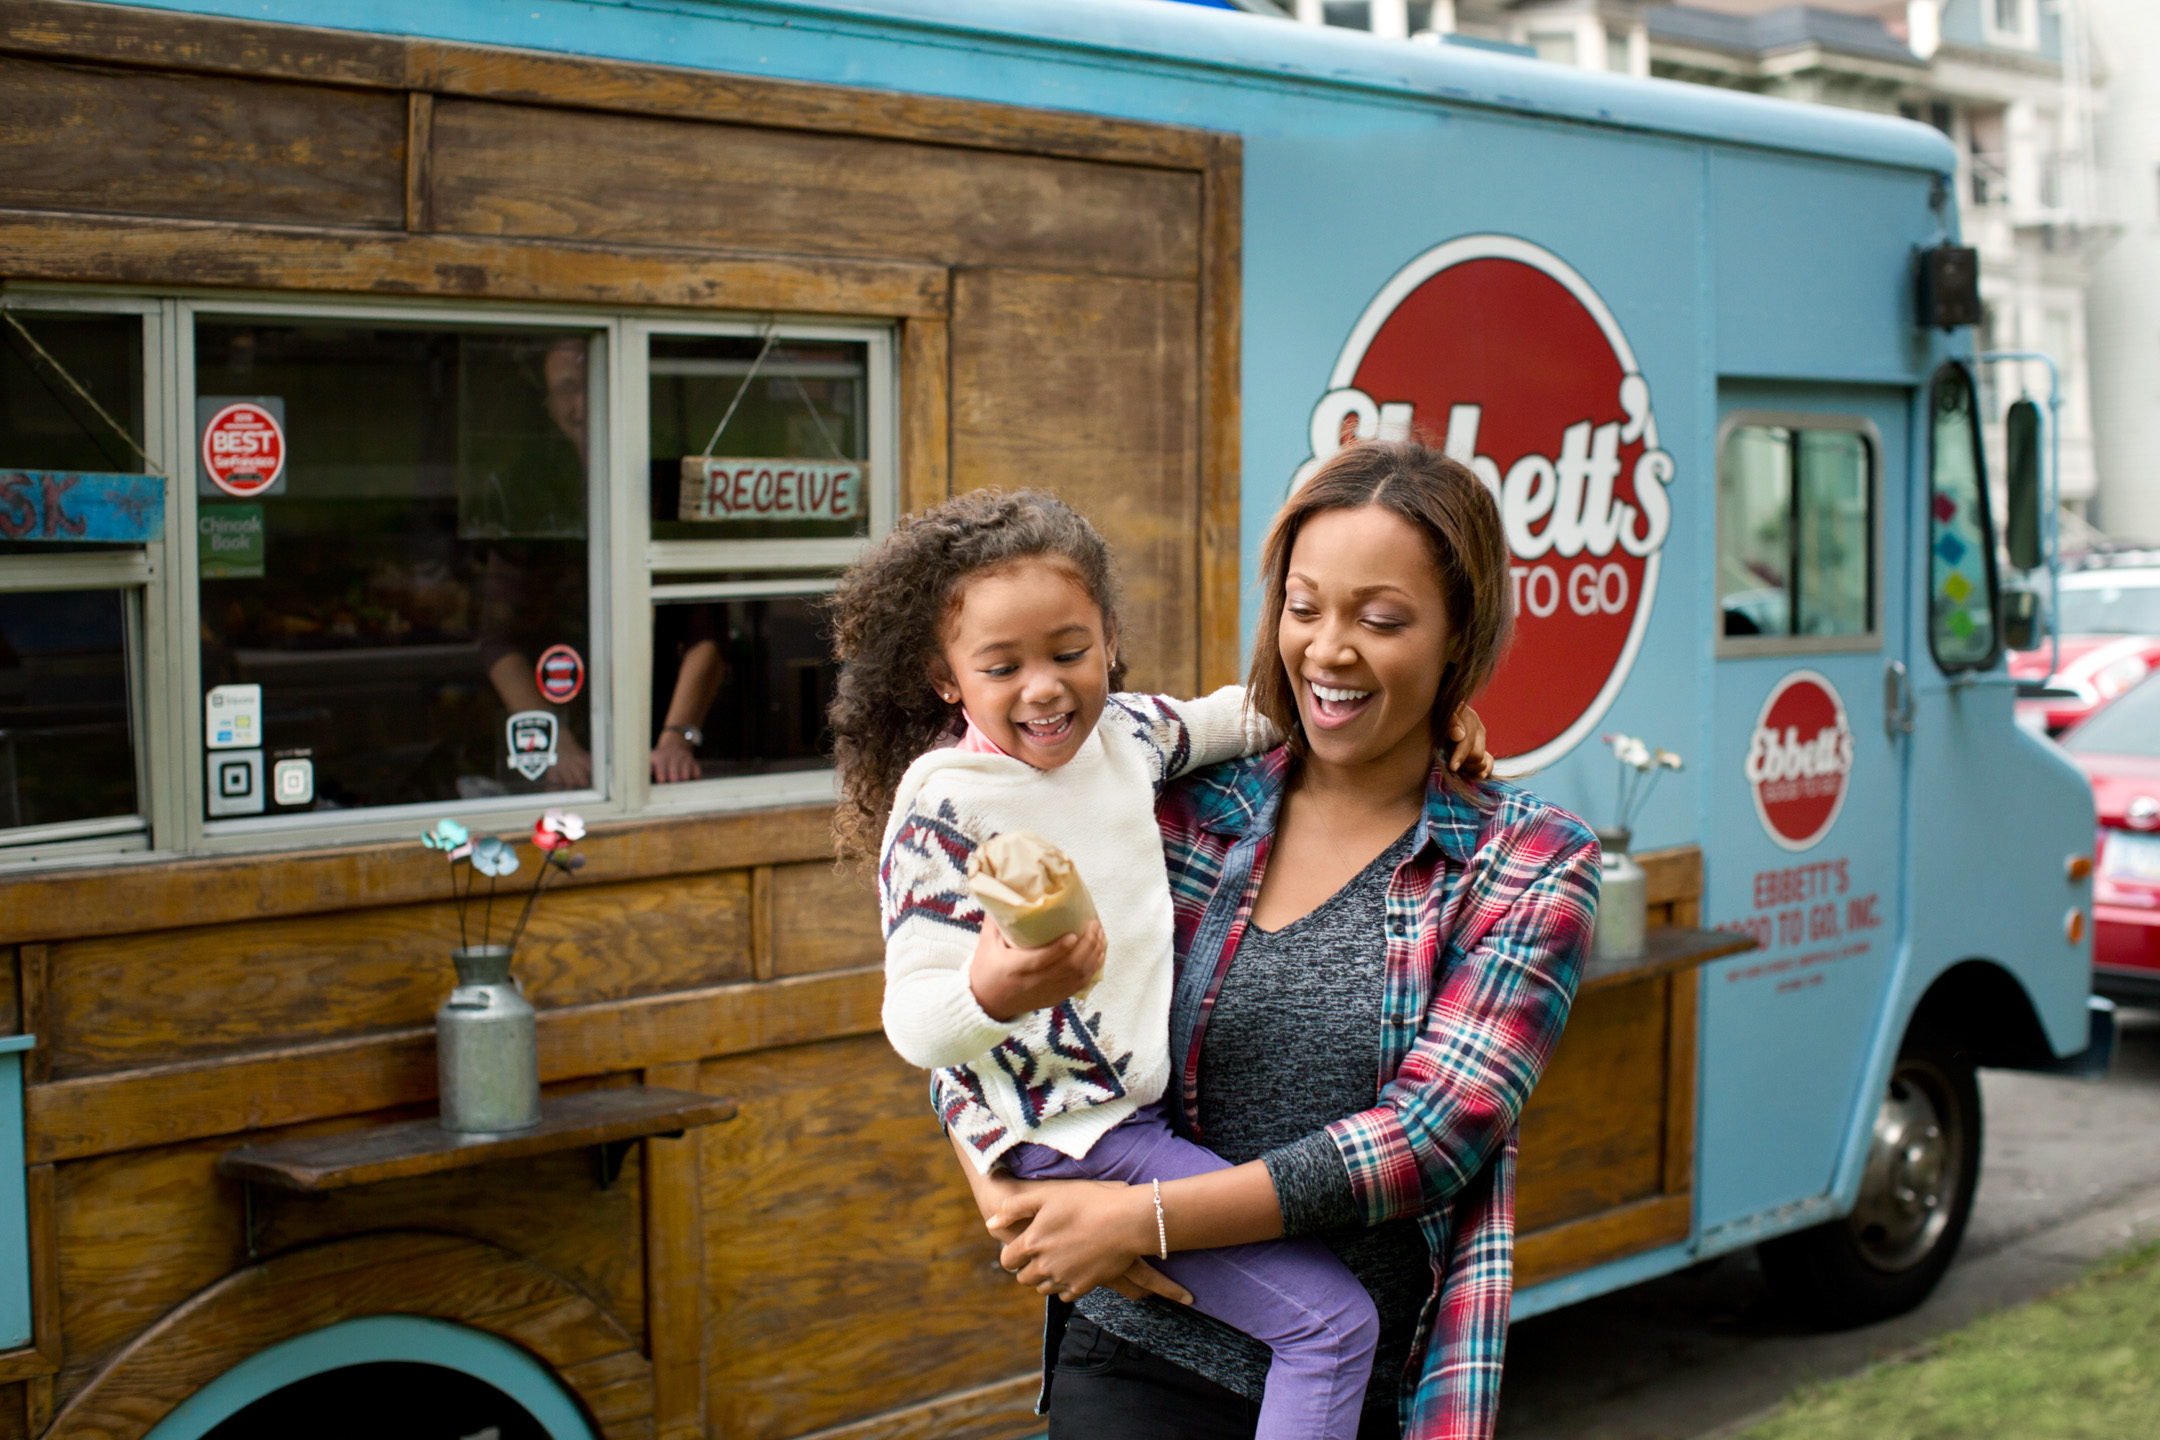 A woman and her daughter buy a sandwich from a food truck